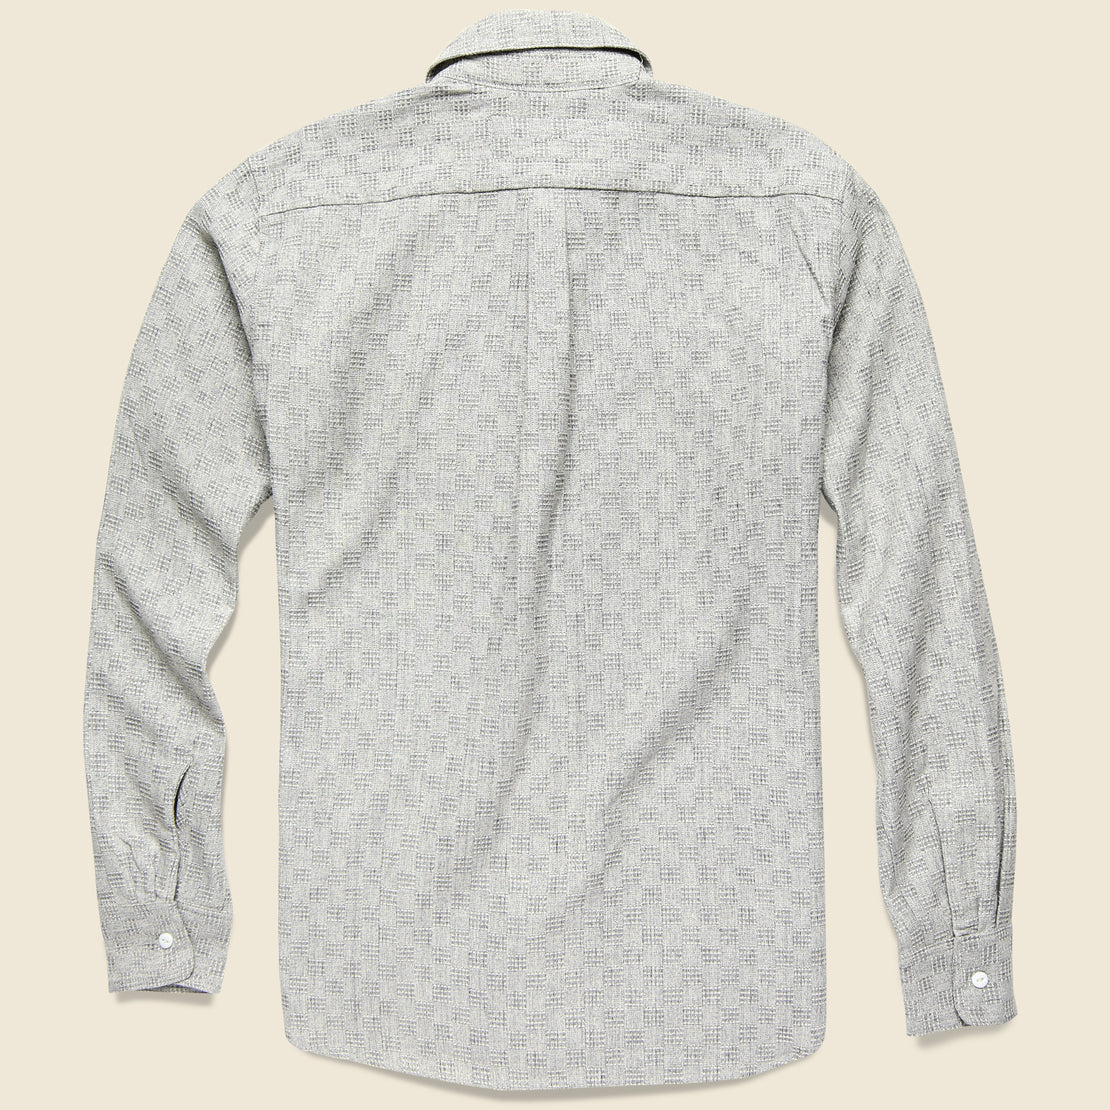 Traveler Shirt - Grey Jacquard - Rogue Territory - STAG Provisions - Tops - L/S Woven - Other Pattern